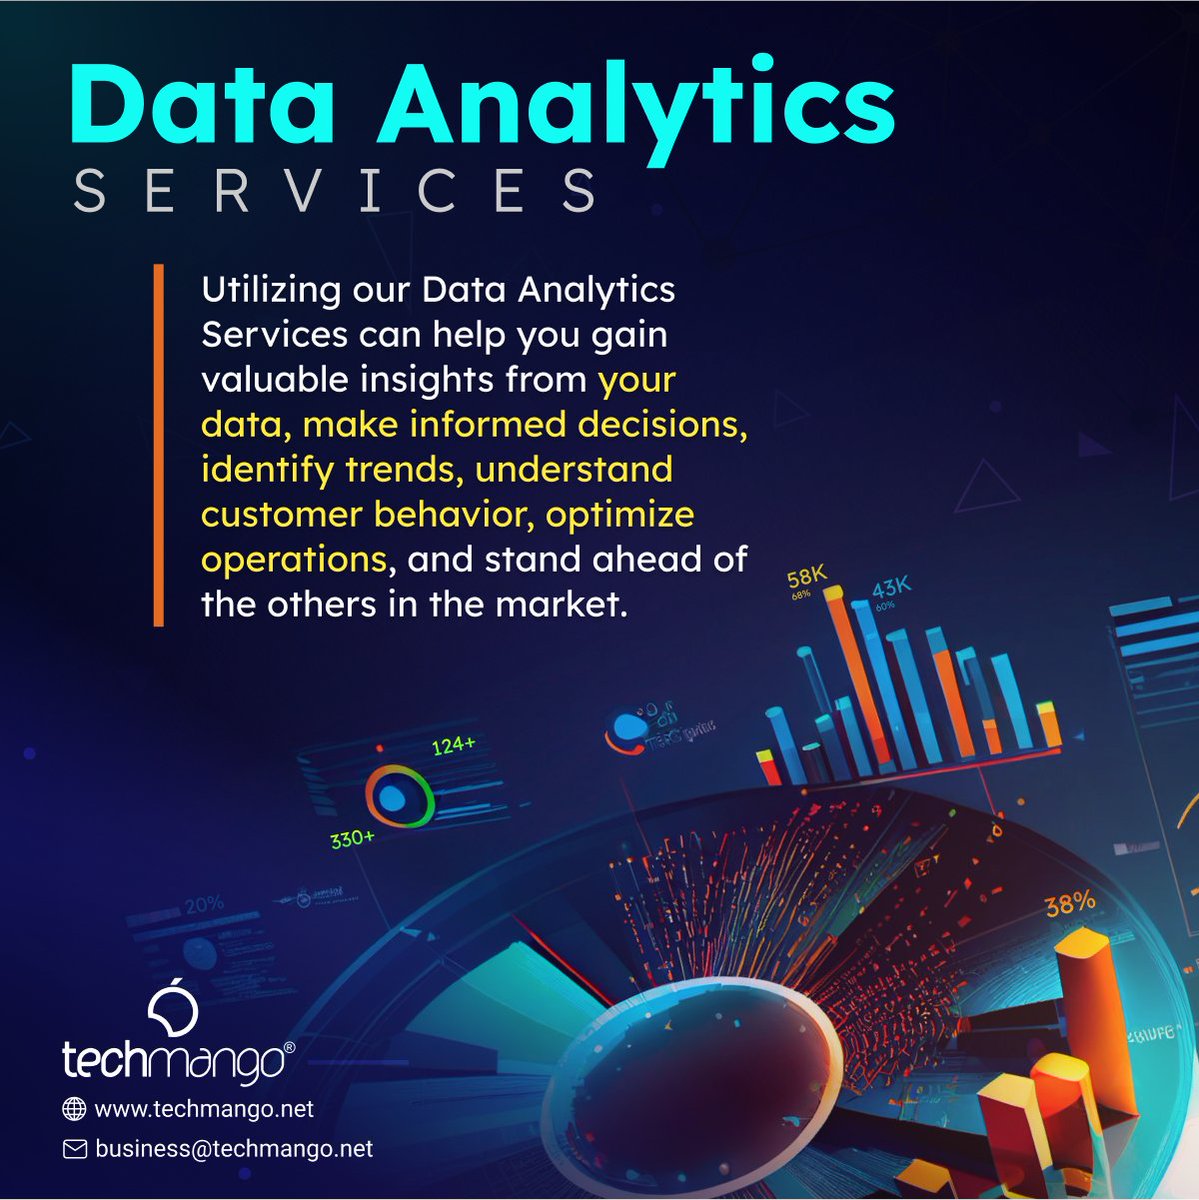 Utilizing our Data analytics services can help you gain valuable #insights from your #data, make informed decisions, identify trends, understand customer behavior, optimize operations, and stand ahead of the others in the market. 👉bit.ly/43FuKe9 #DataAnalytics